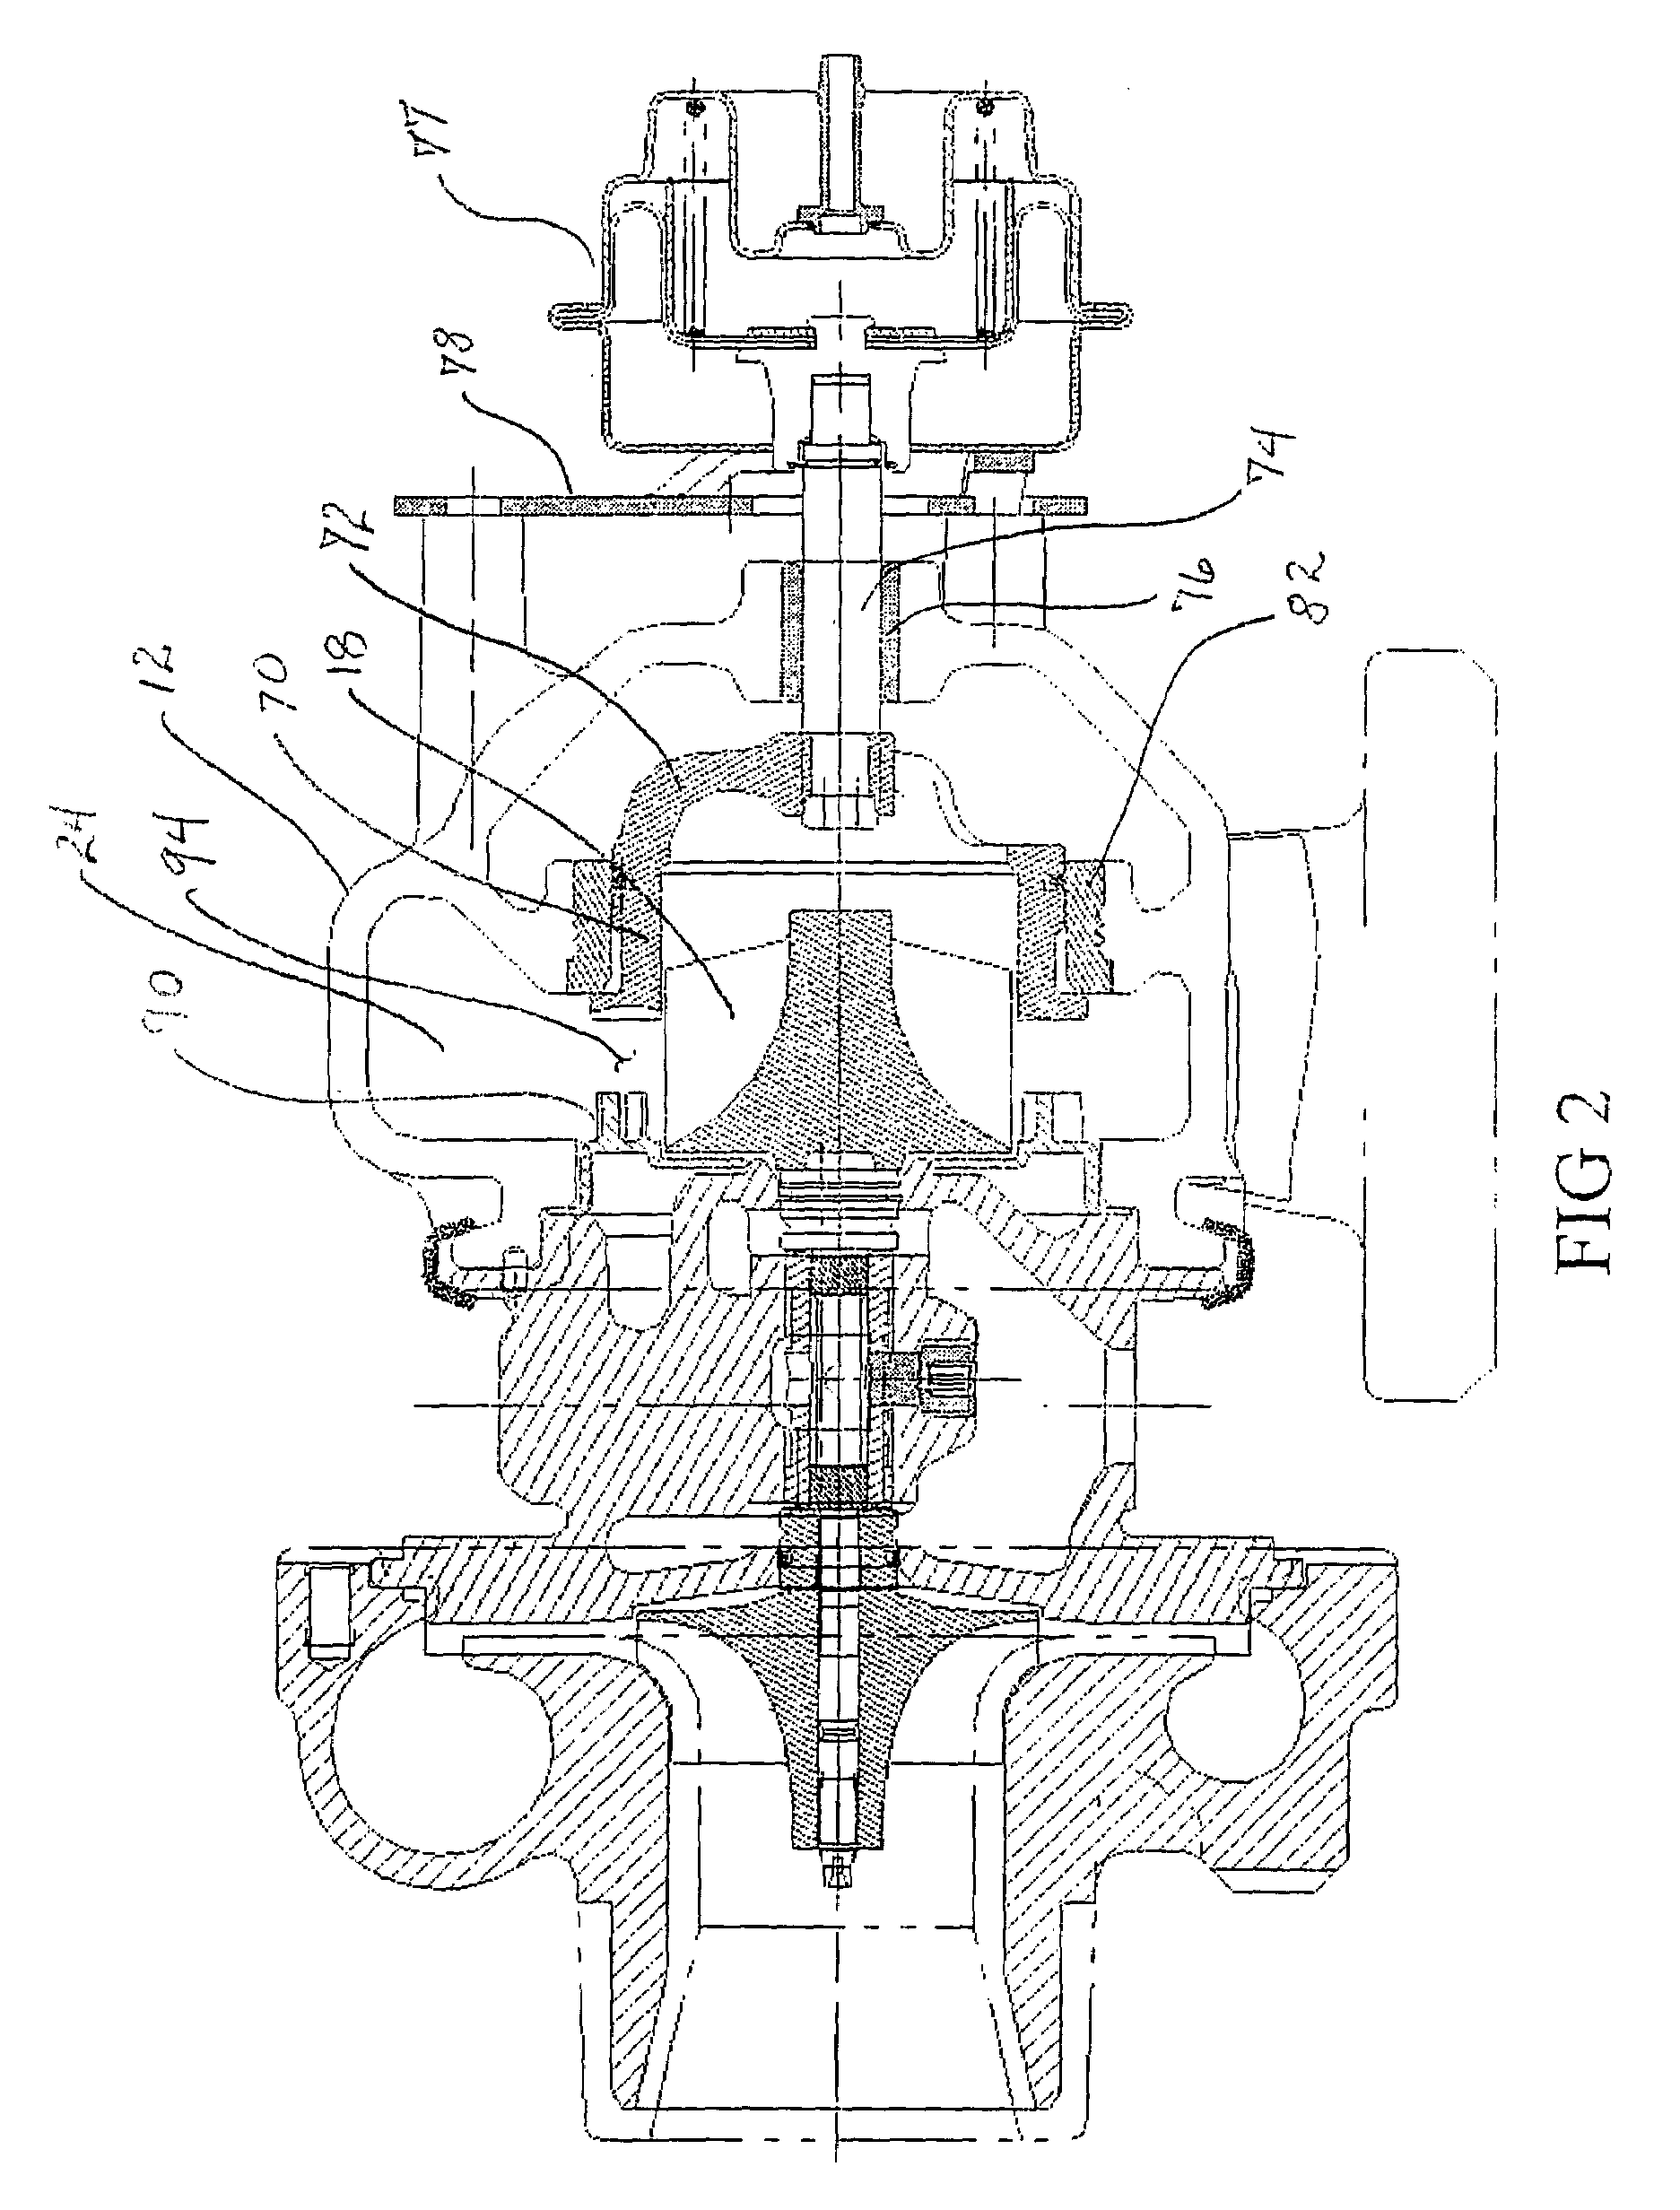 Variable geometry turbocharger with sliding piston